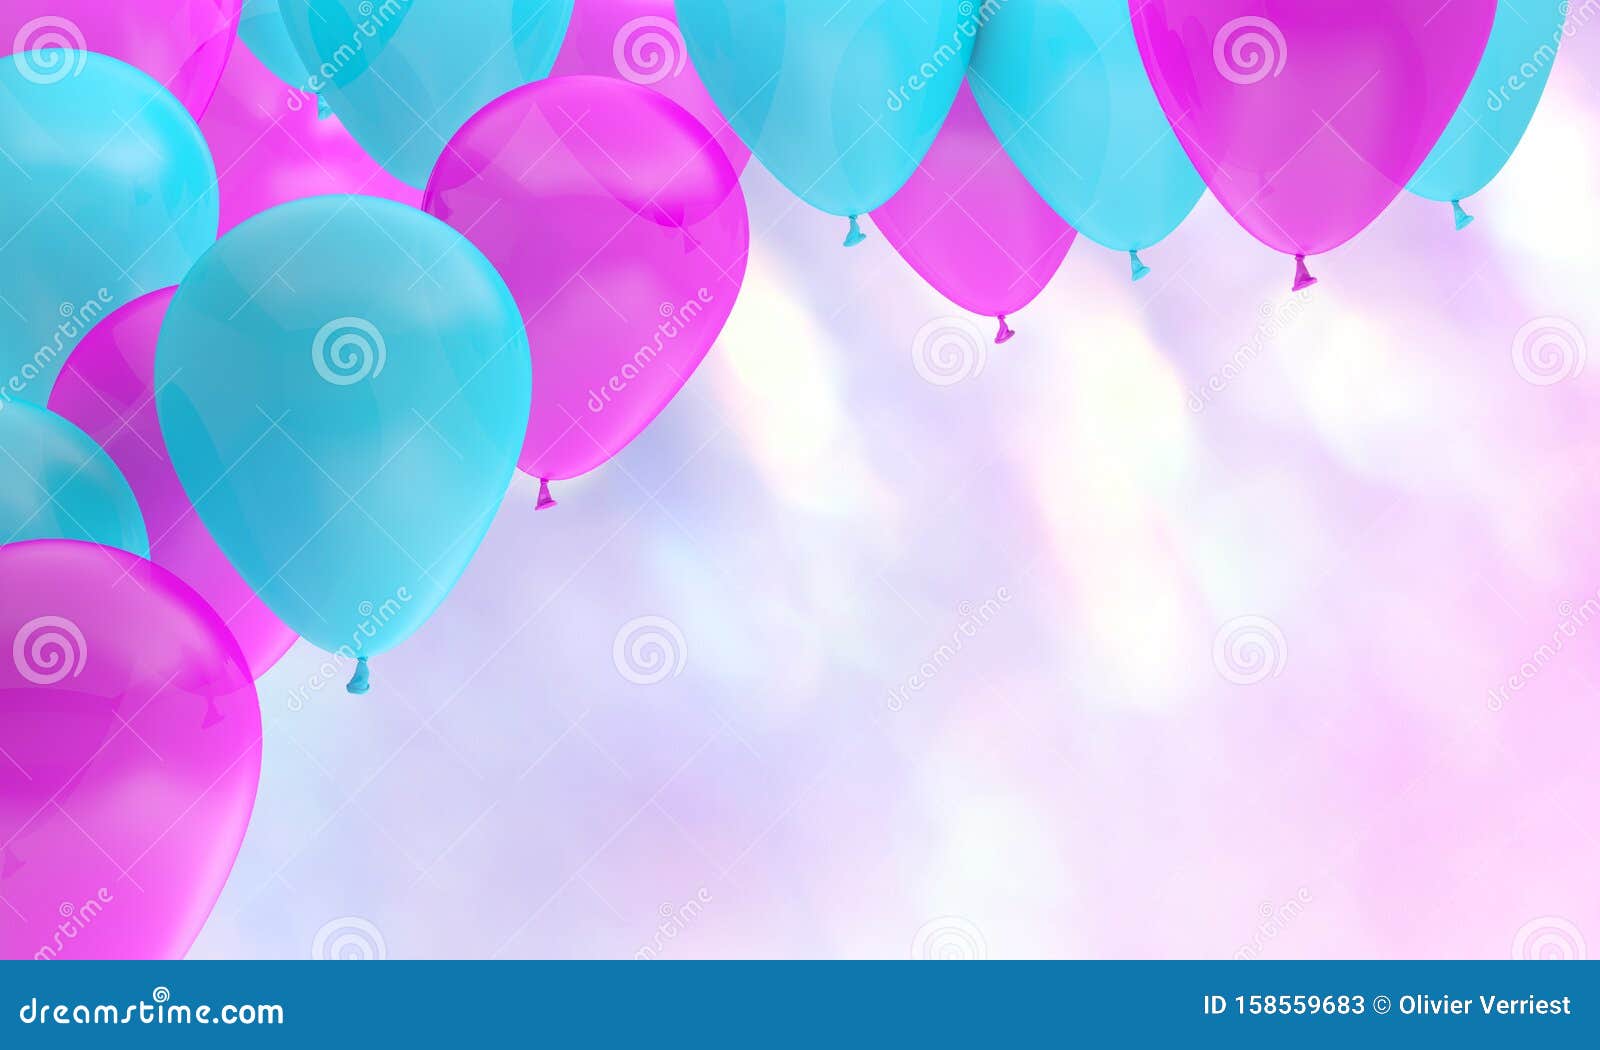 Balloon Purple Blue Birthday Background Party Stock Image - Image of gift,  birthday: 158559683